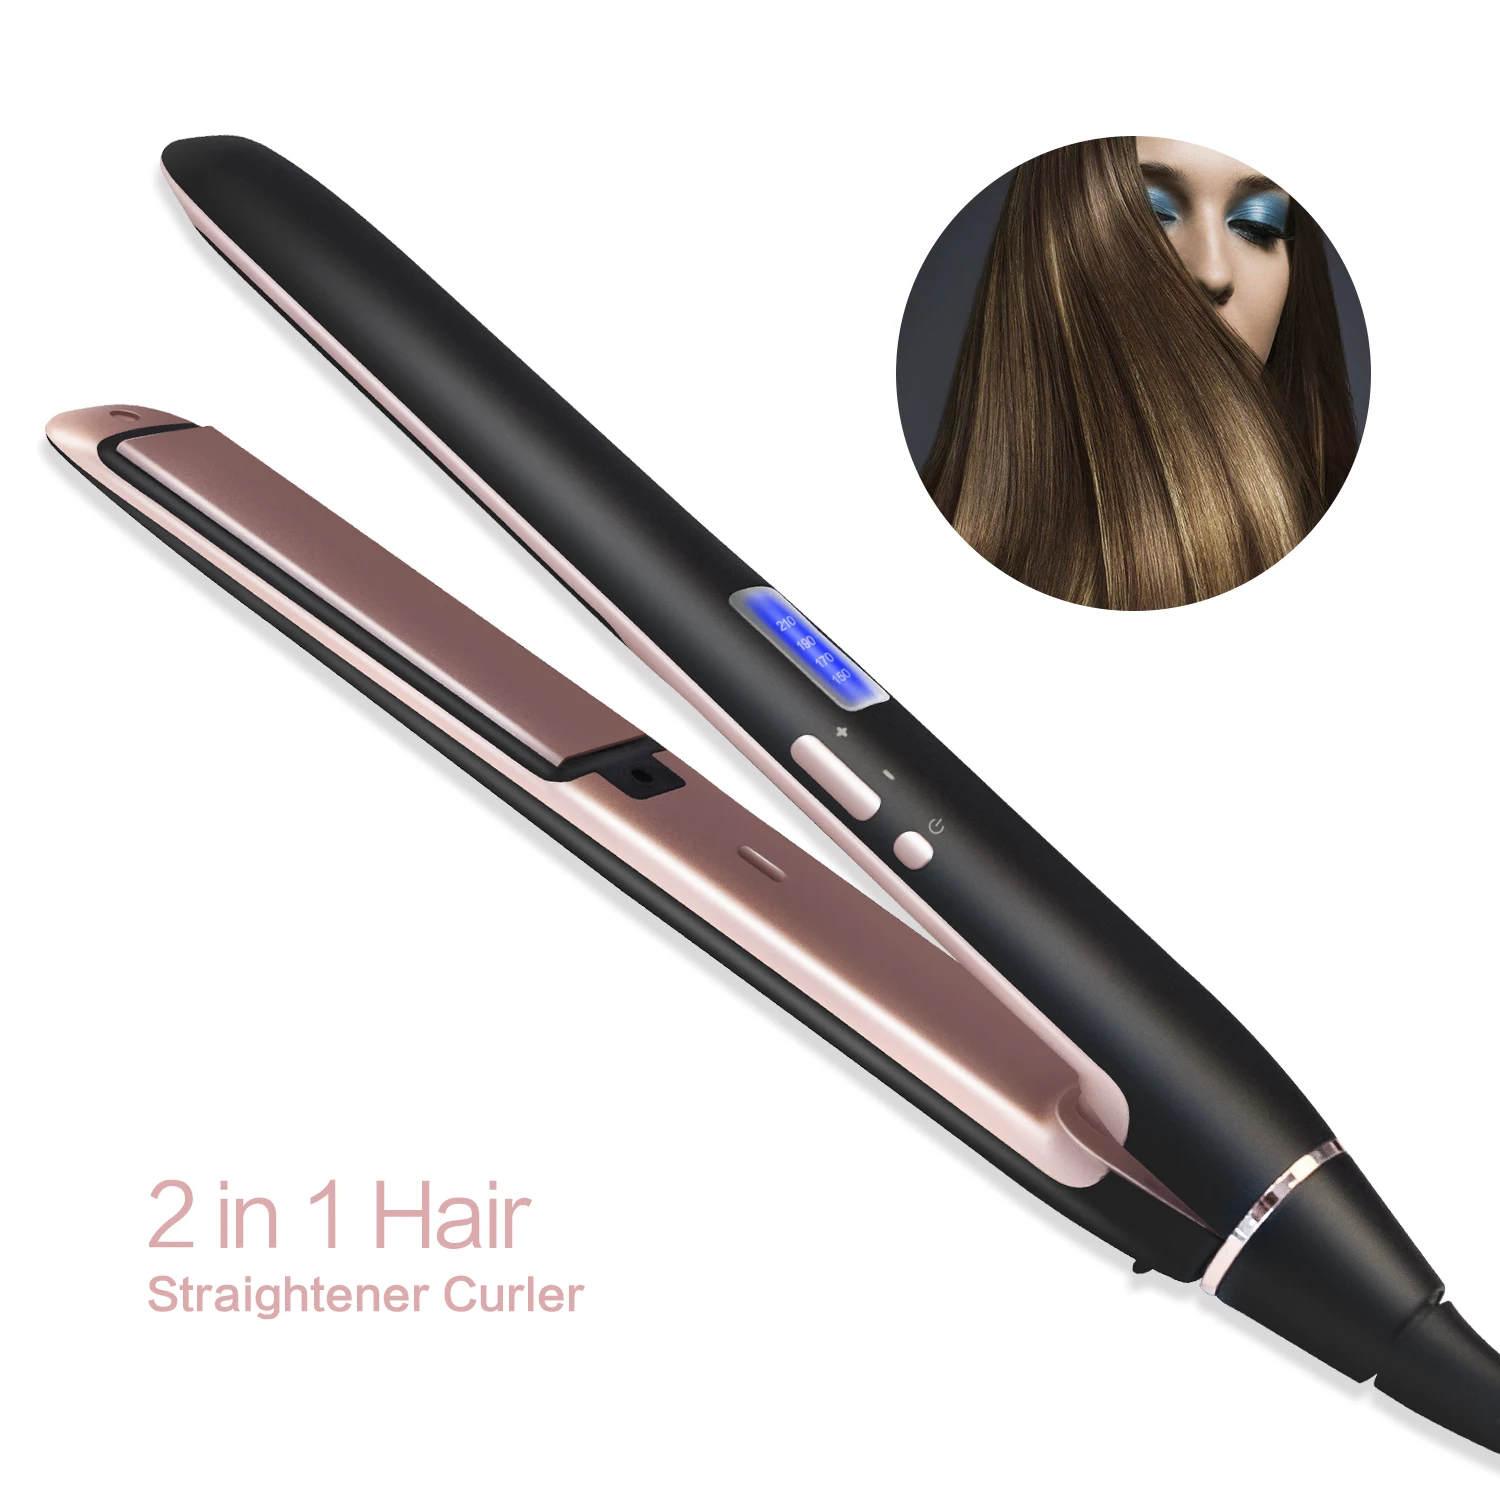 

Professional Hair Straightener Curler Hair Flat Iron Negative Ion Infrared LED Display Hair Straightening Curling Iron, Black+gold